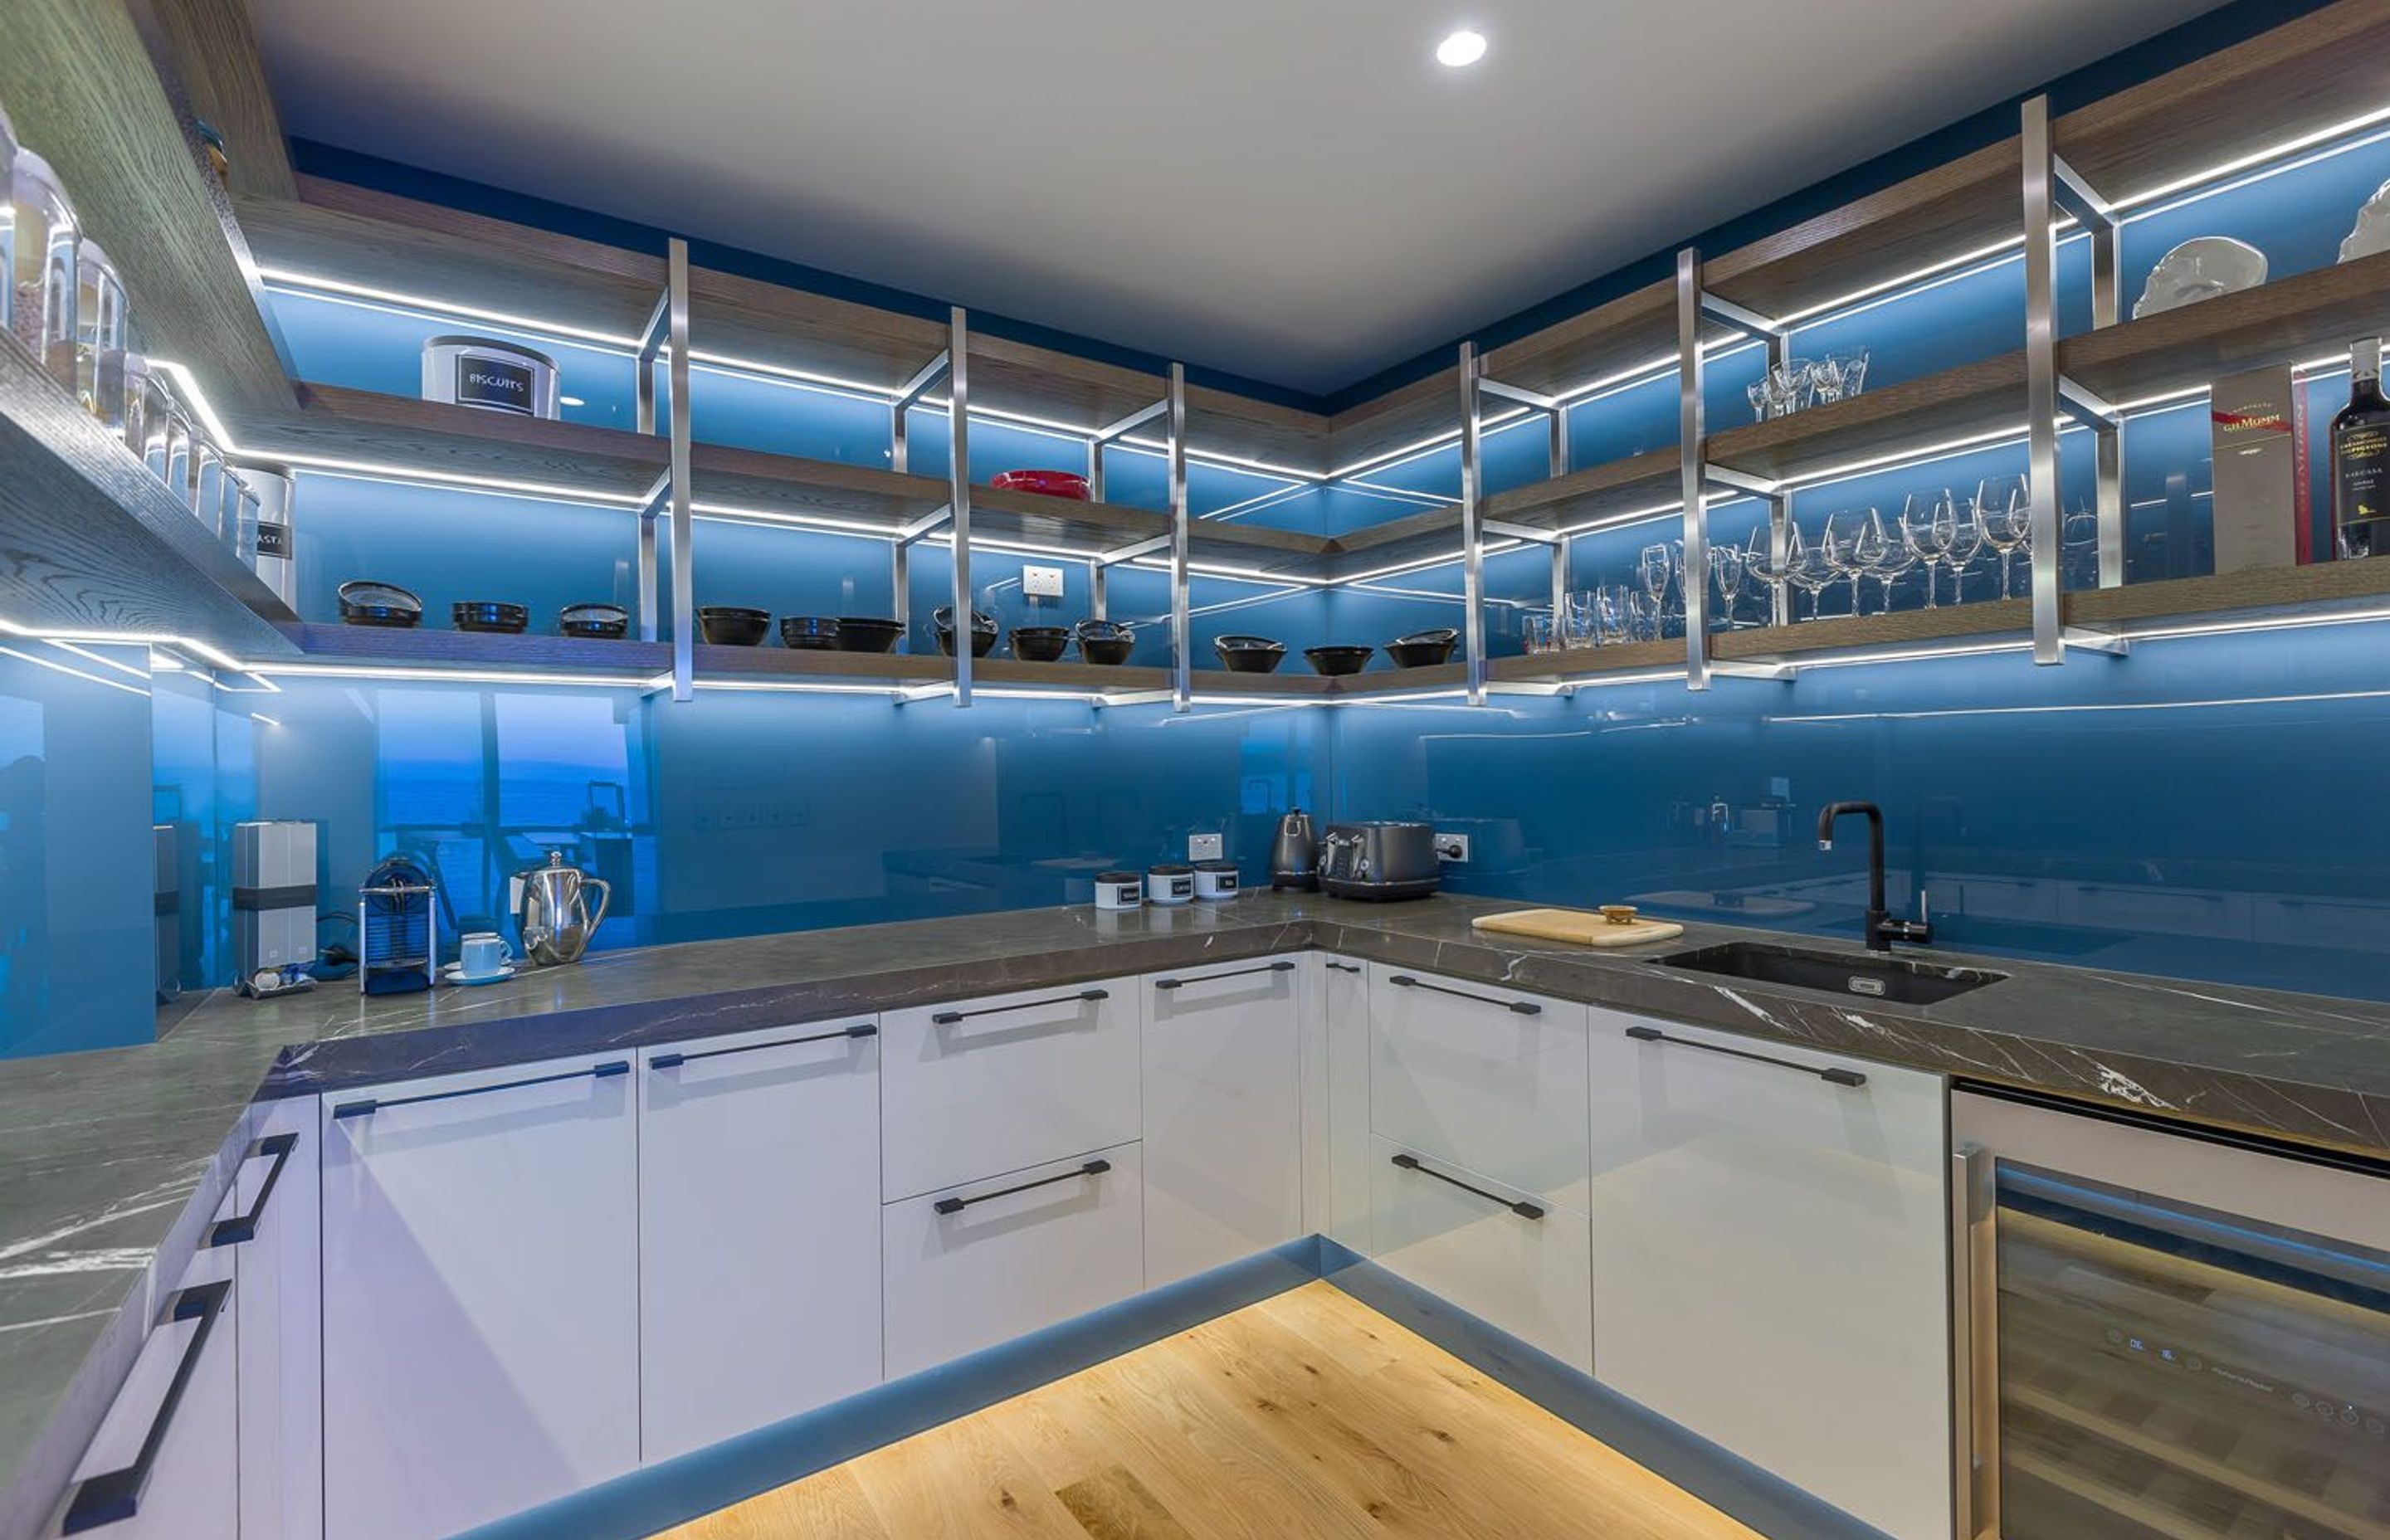 This stunning kitchen designed by Mal Corboy features glass toe-kicks that are up-lit with LED lighting, creating a striking lighting effect against the blue coloured glass. Image credit: Kallan MacLeod.